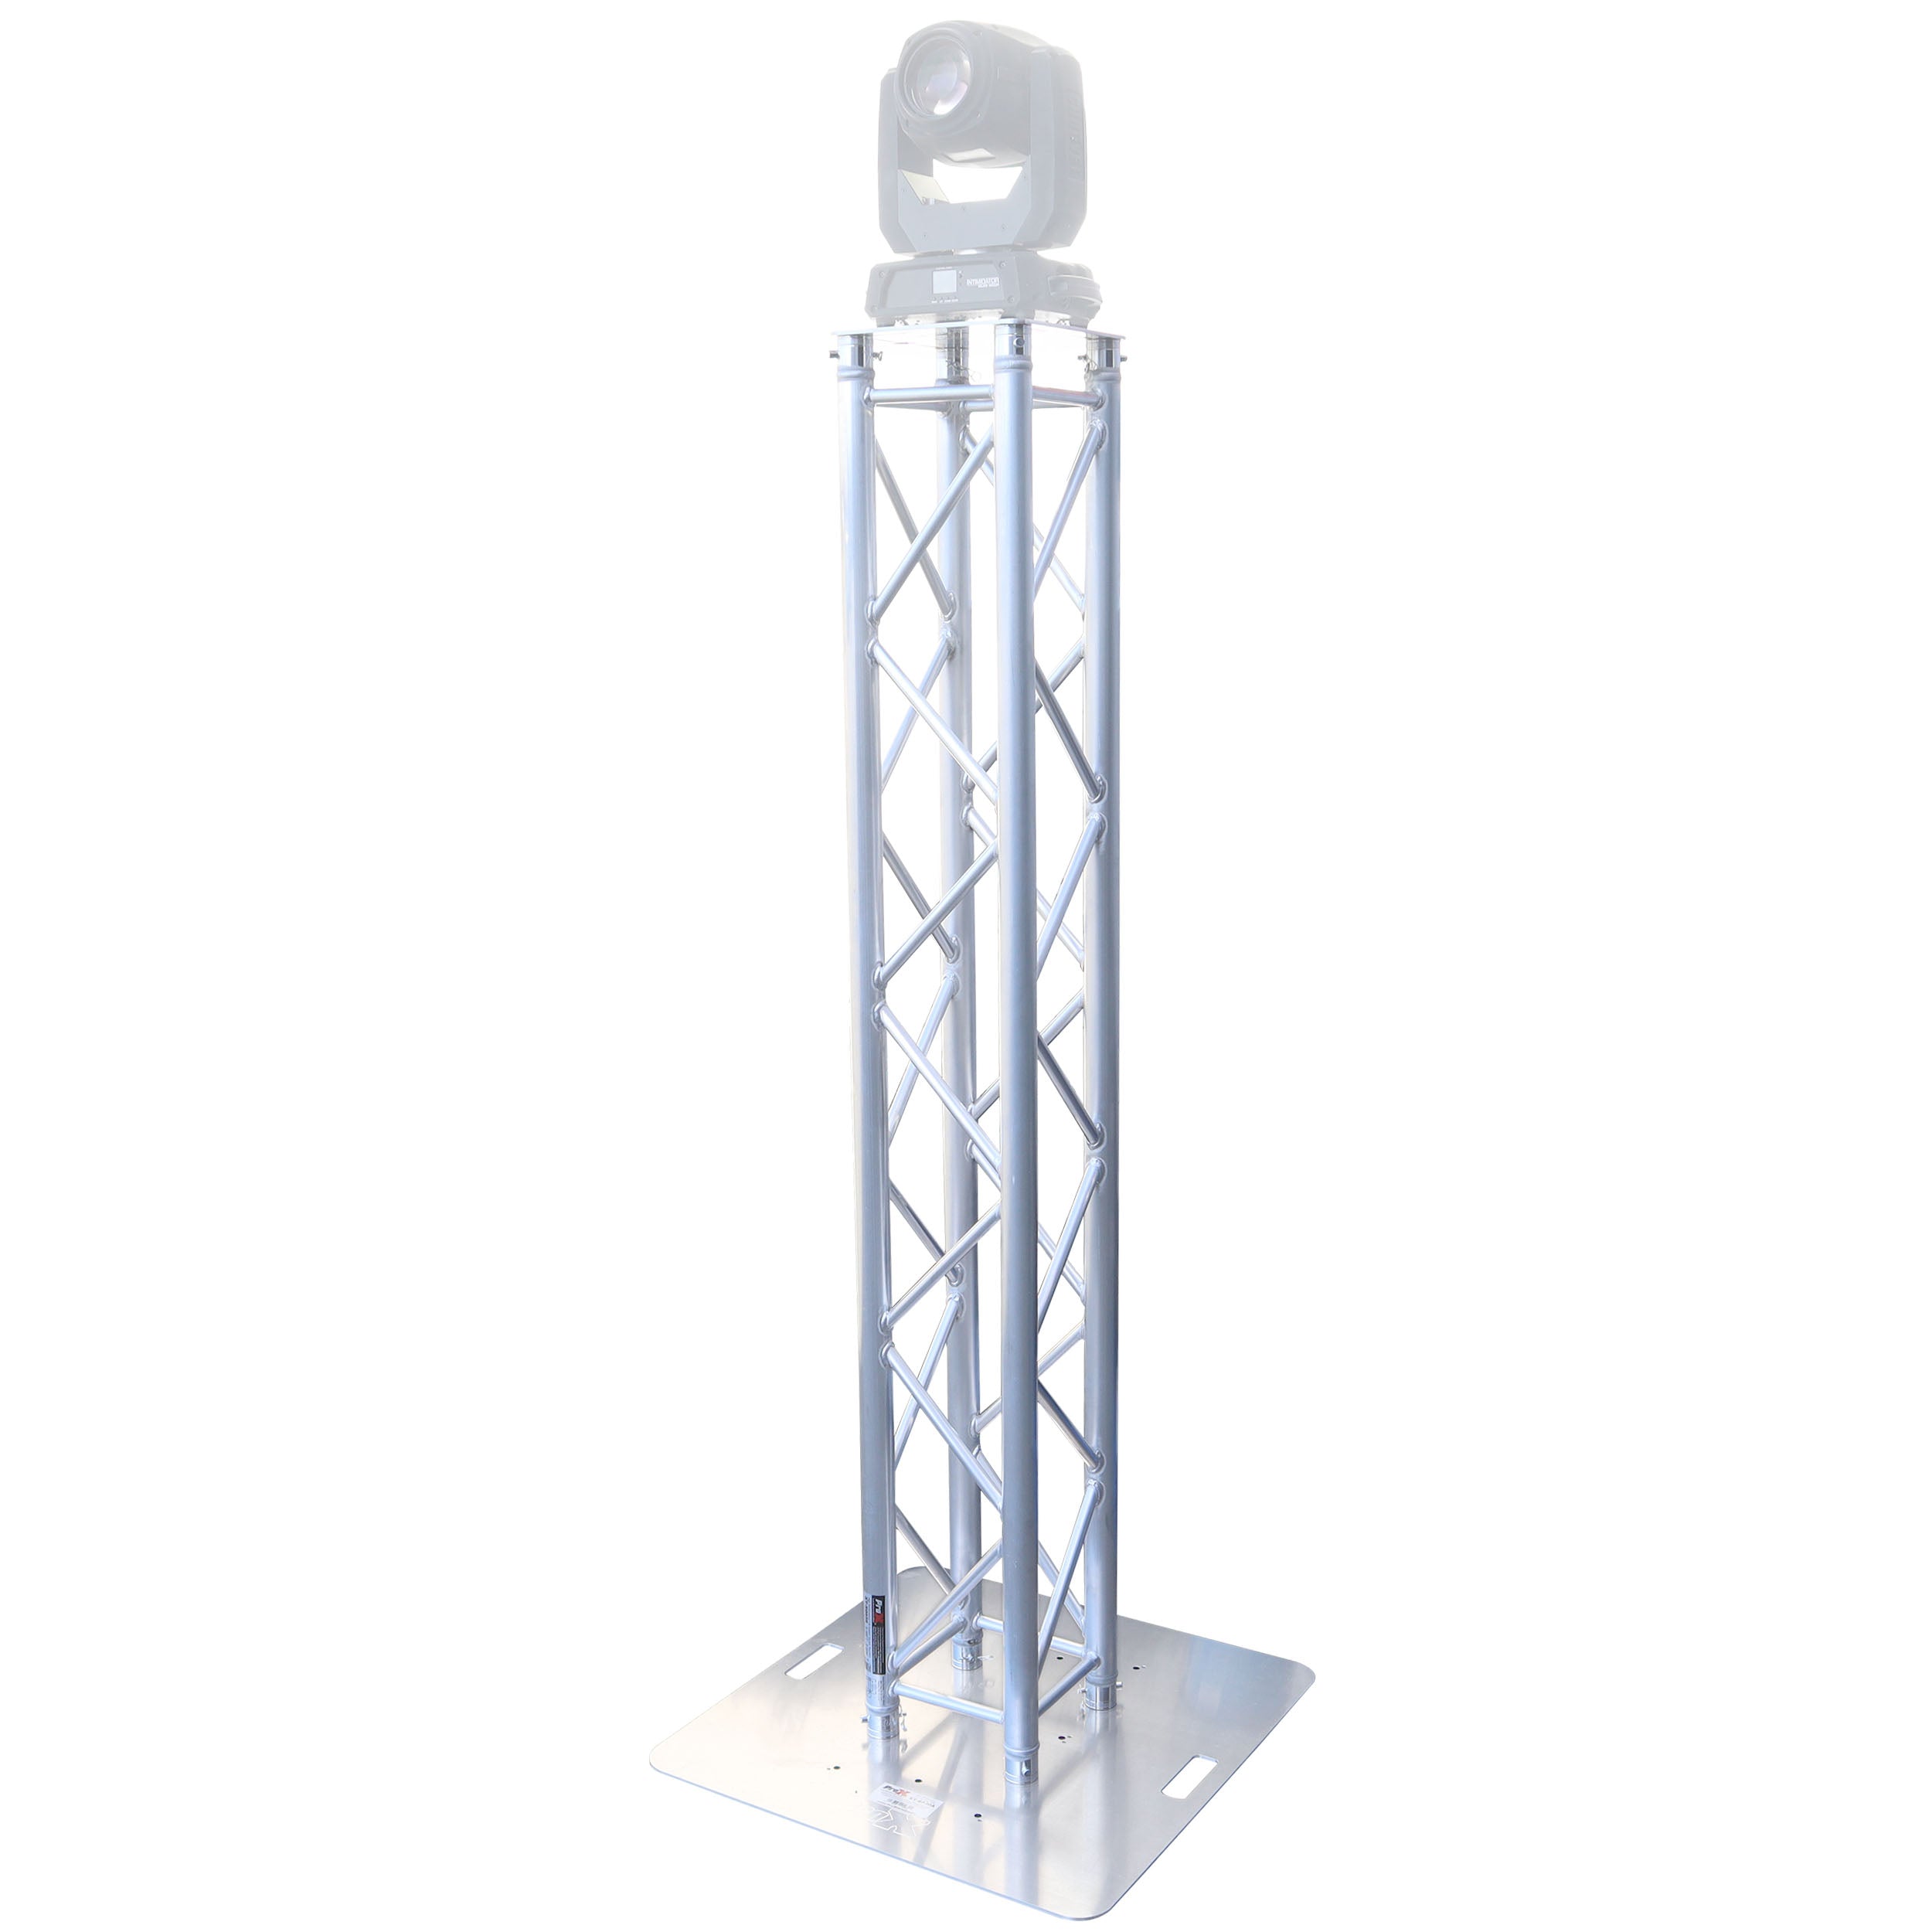 ProX K-Truss 6.56 Lightweight Square Truss Totem Full Package Includes White Scrim, Top Plate and Base Plate KT-SQ656TOTEMTCX2